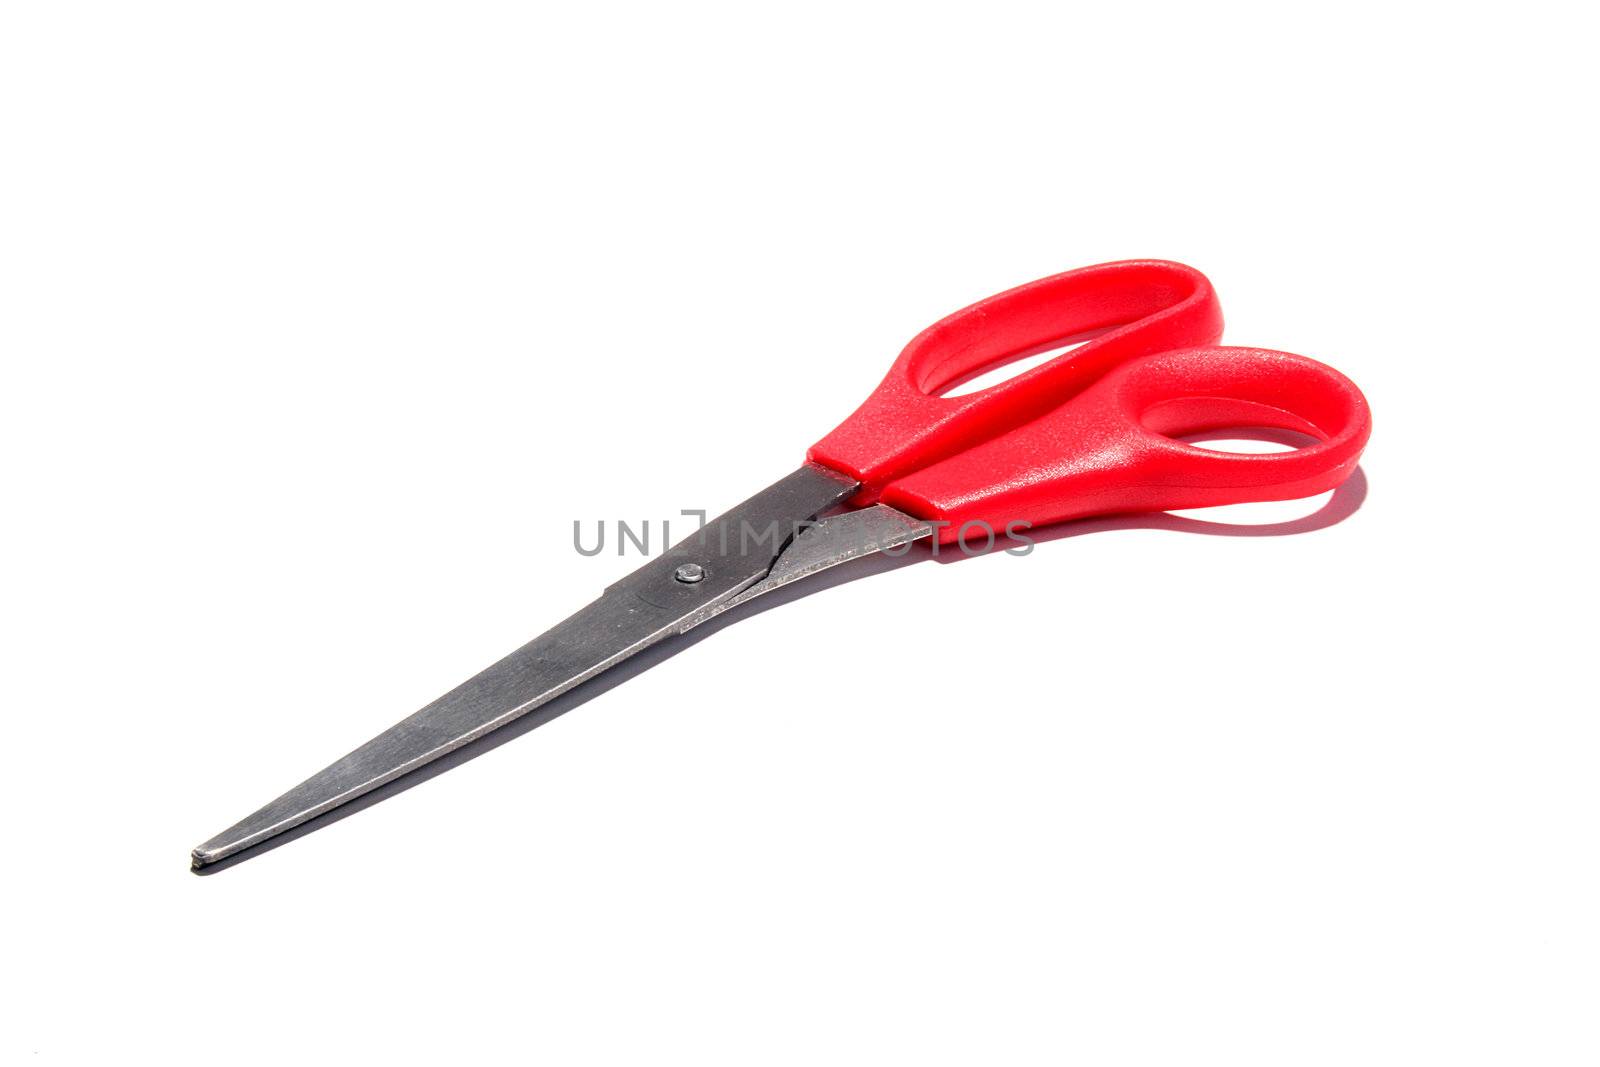 Scissors with red handles on a white background.